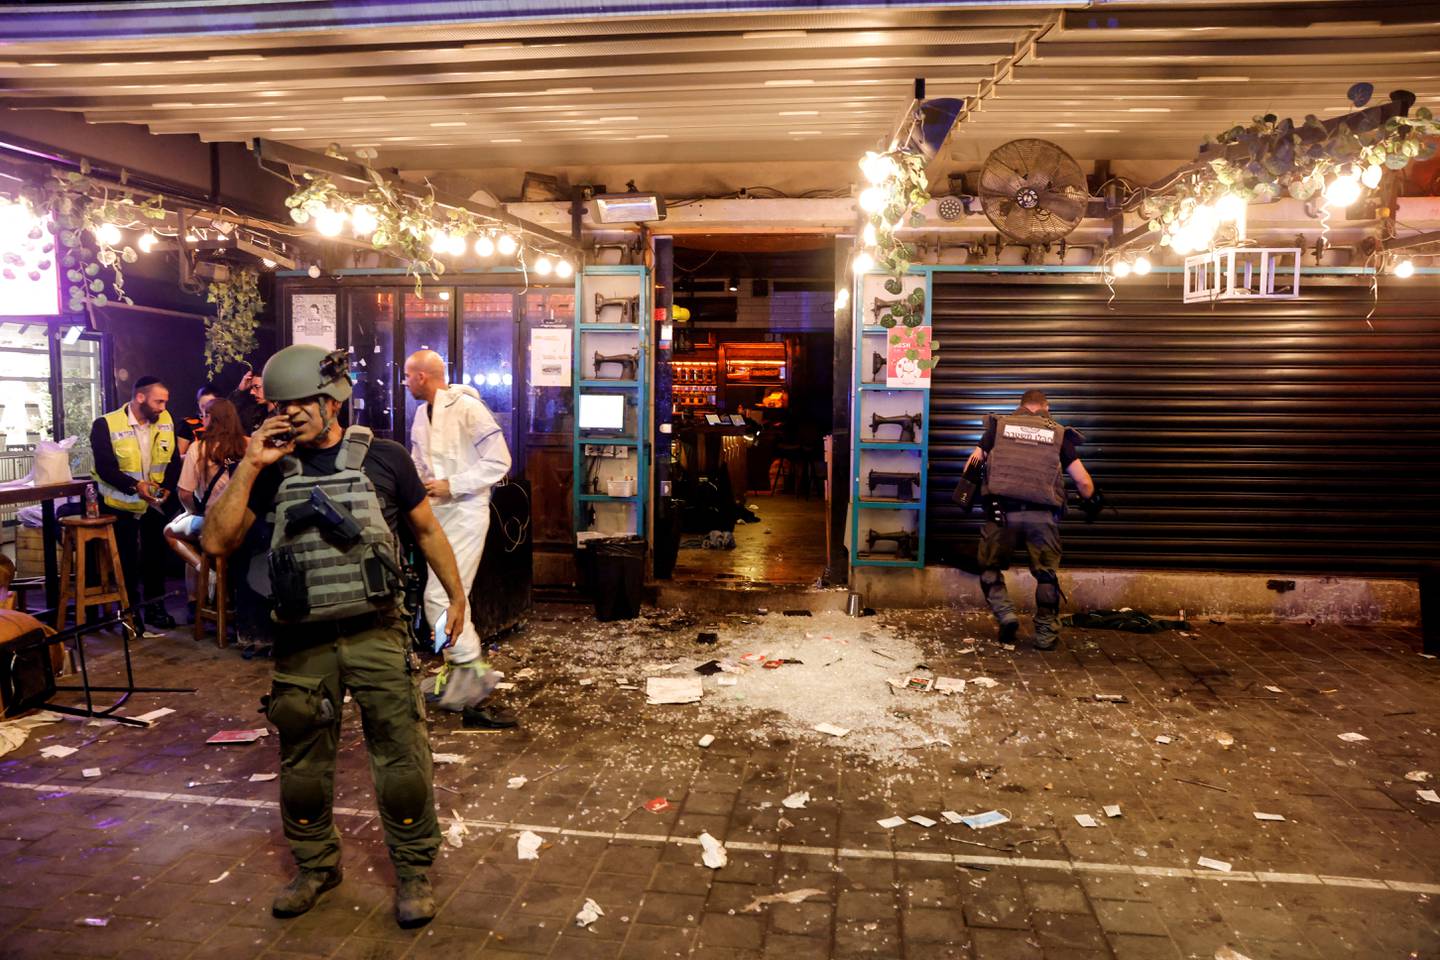 Israeli security and rescue personnel work by the entrance to a restaurant after a shooting in Tel Aviv on April 7. Reuters